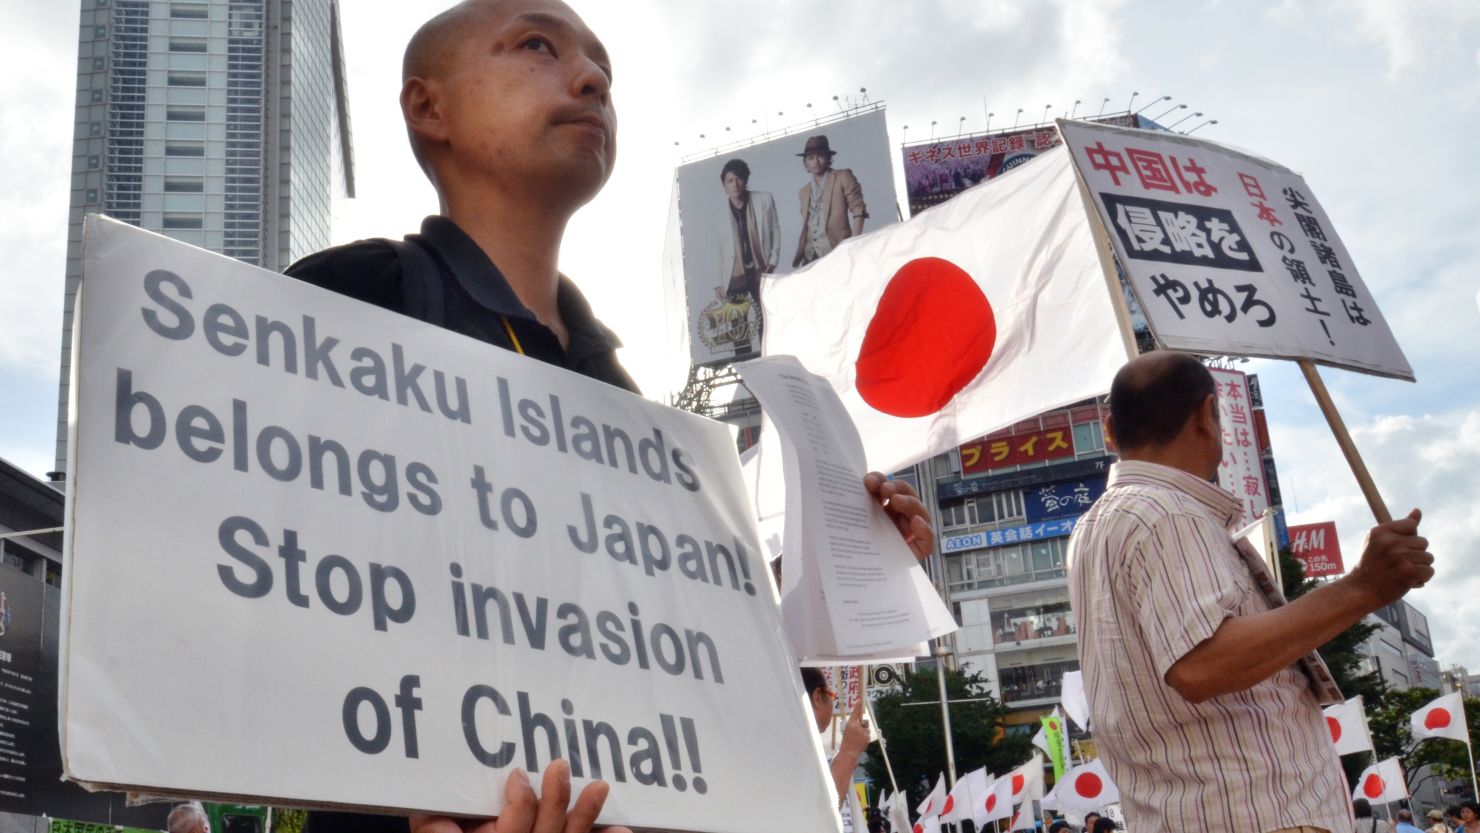 Protests against China's stance on the Senkaku/Diaoyu islands have so far been limited.